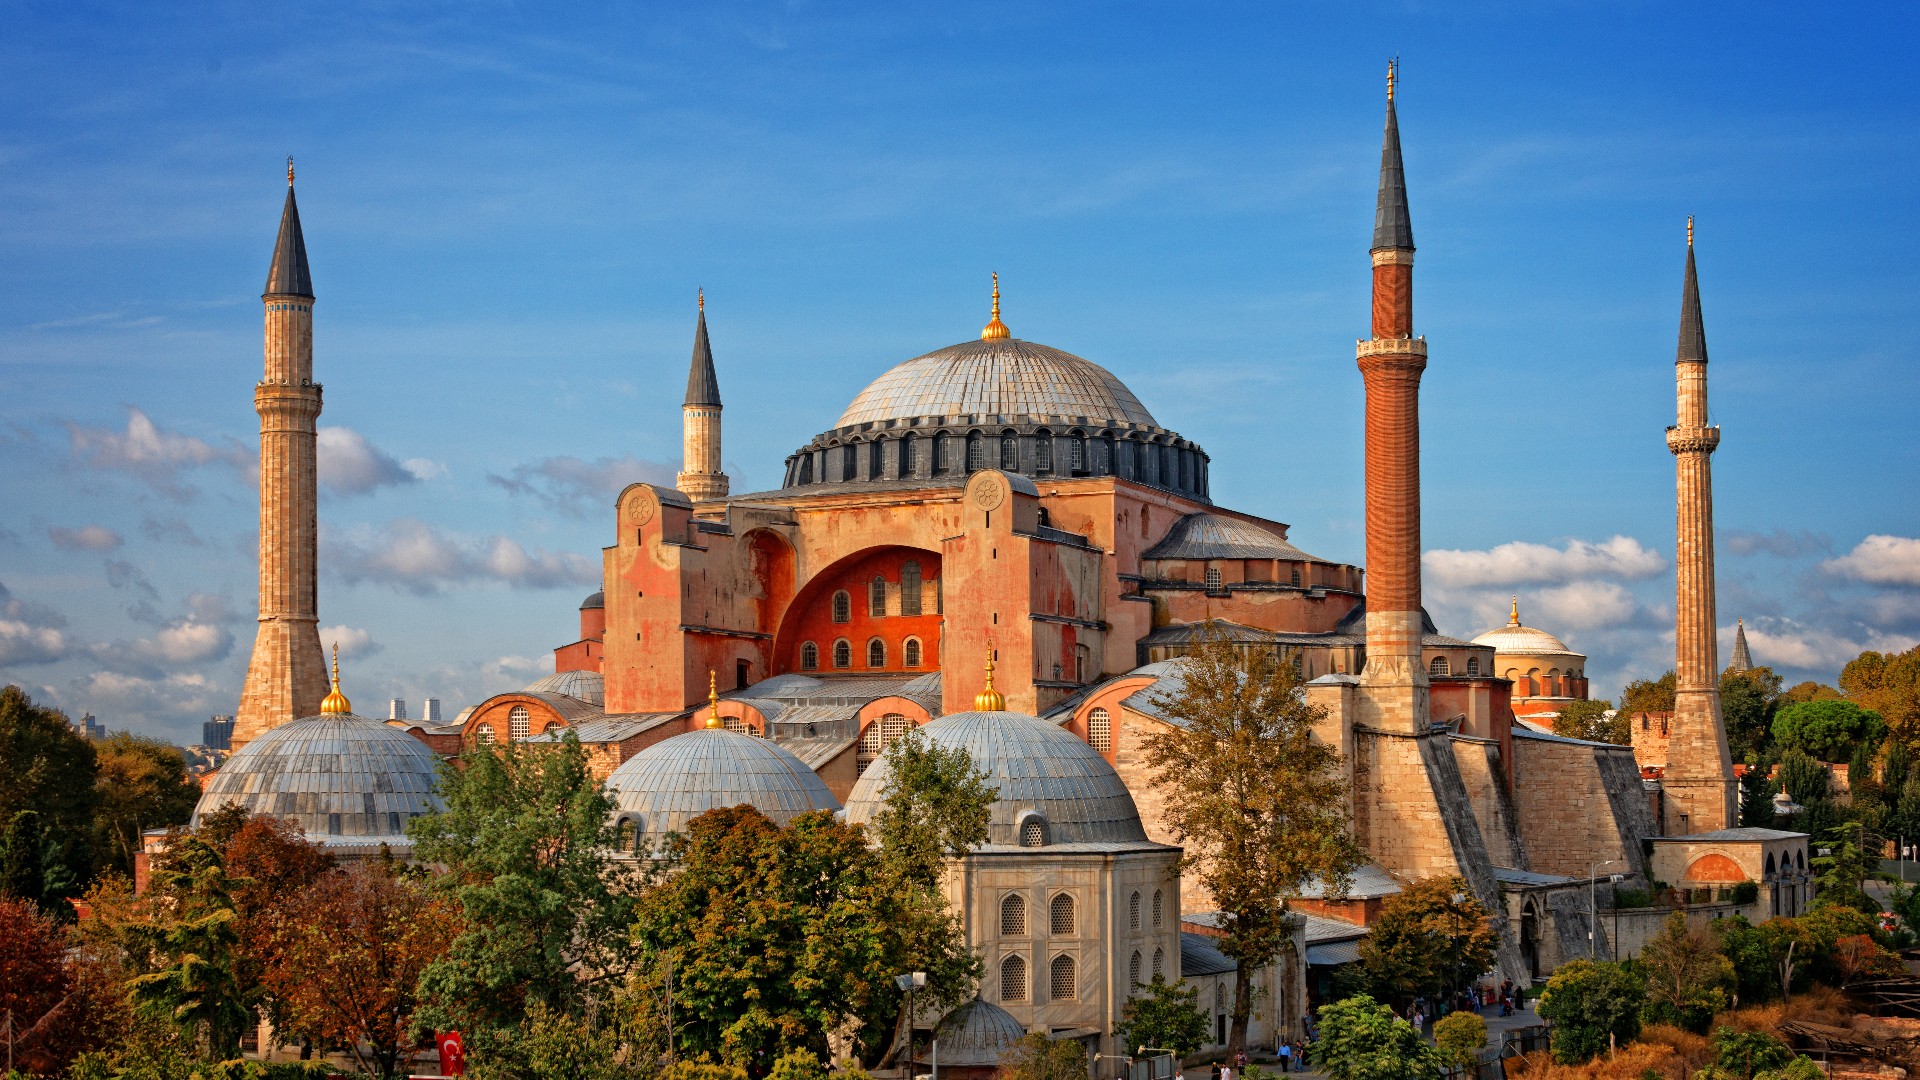 Hagia Sophia (Ayasofya), a large domed monument surrounded by 4 tall, pointy towers in Istanbul, Turkey.